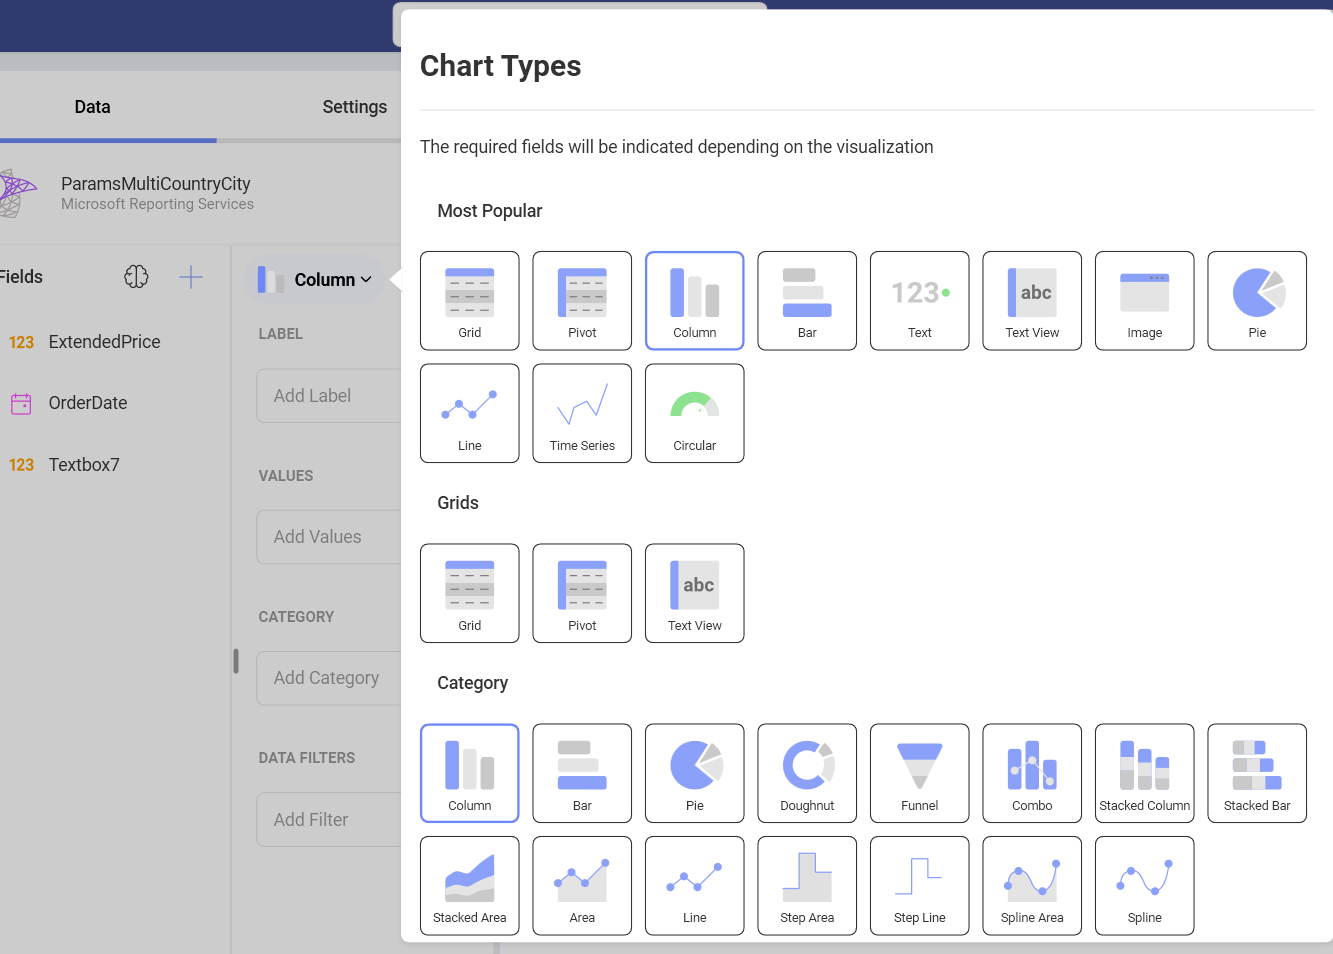 List of chart types available while using Microsoft Reporting Services as data source